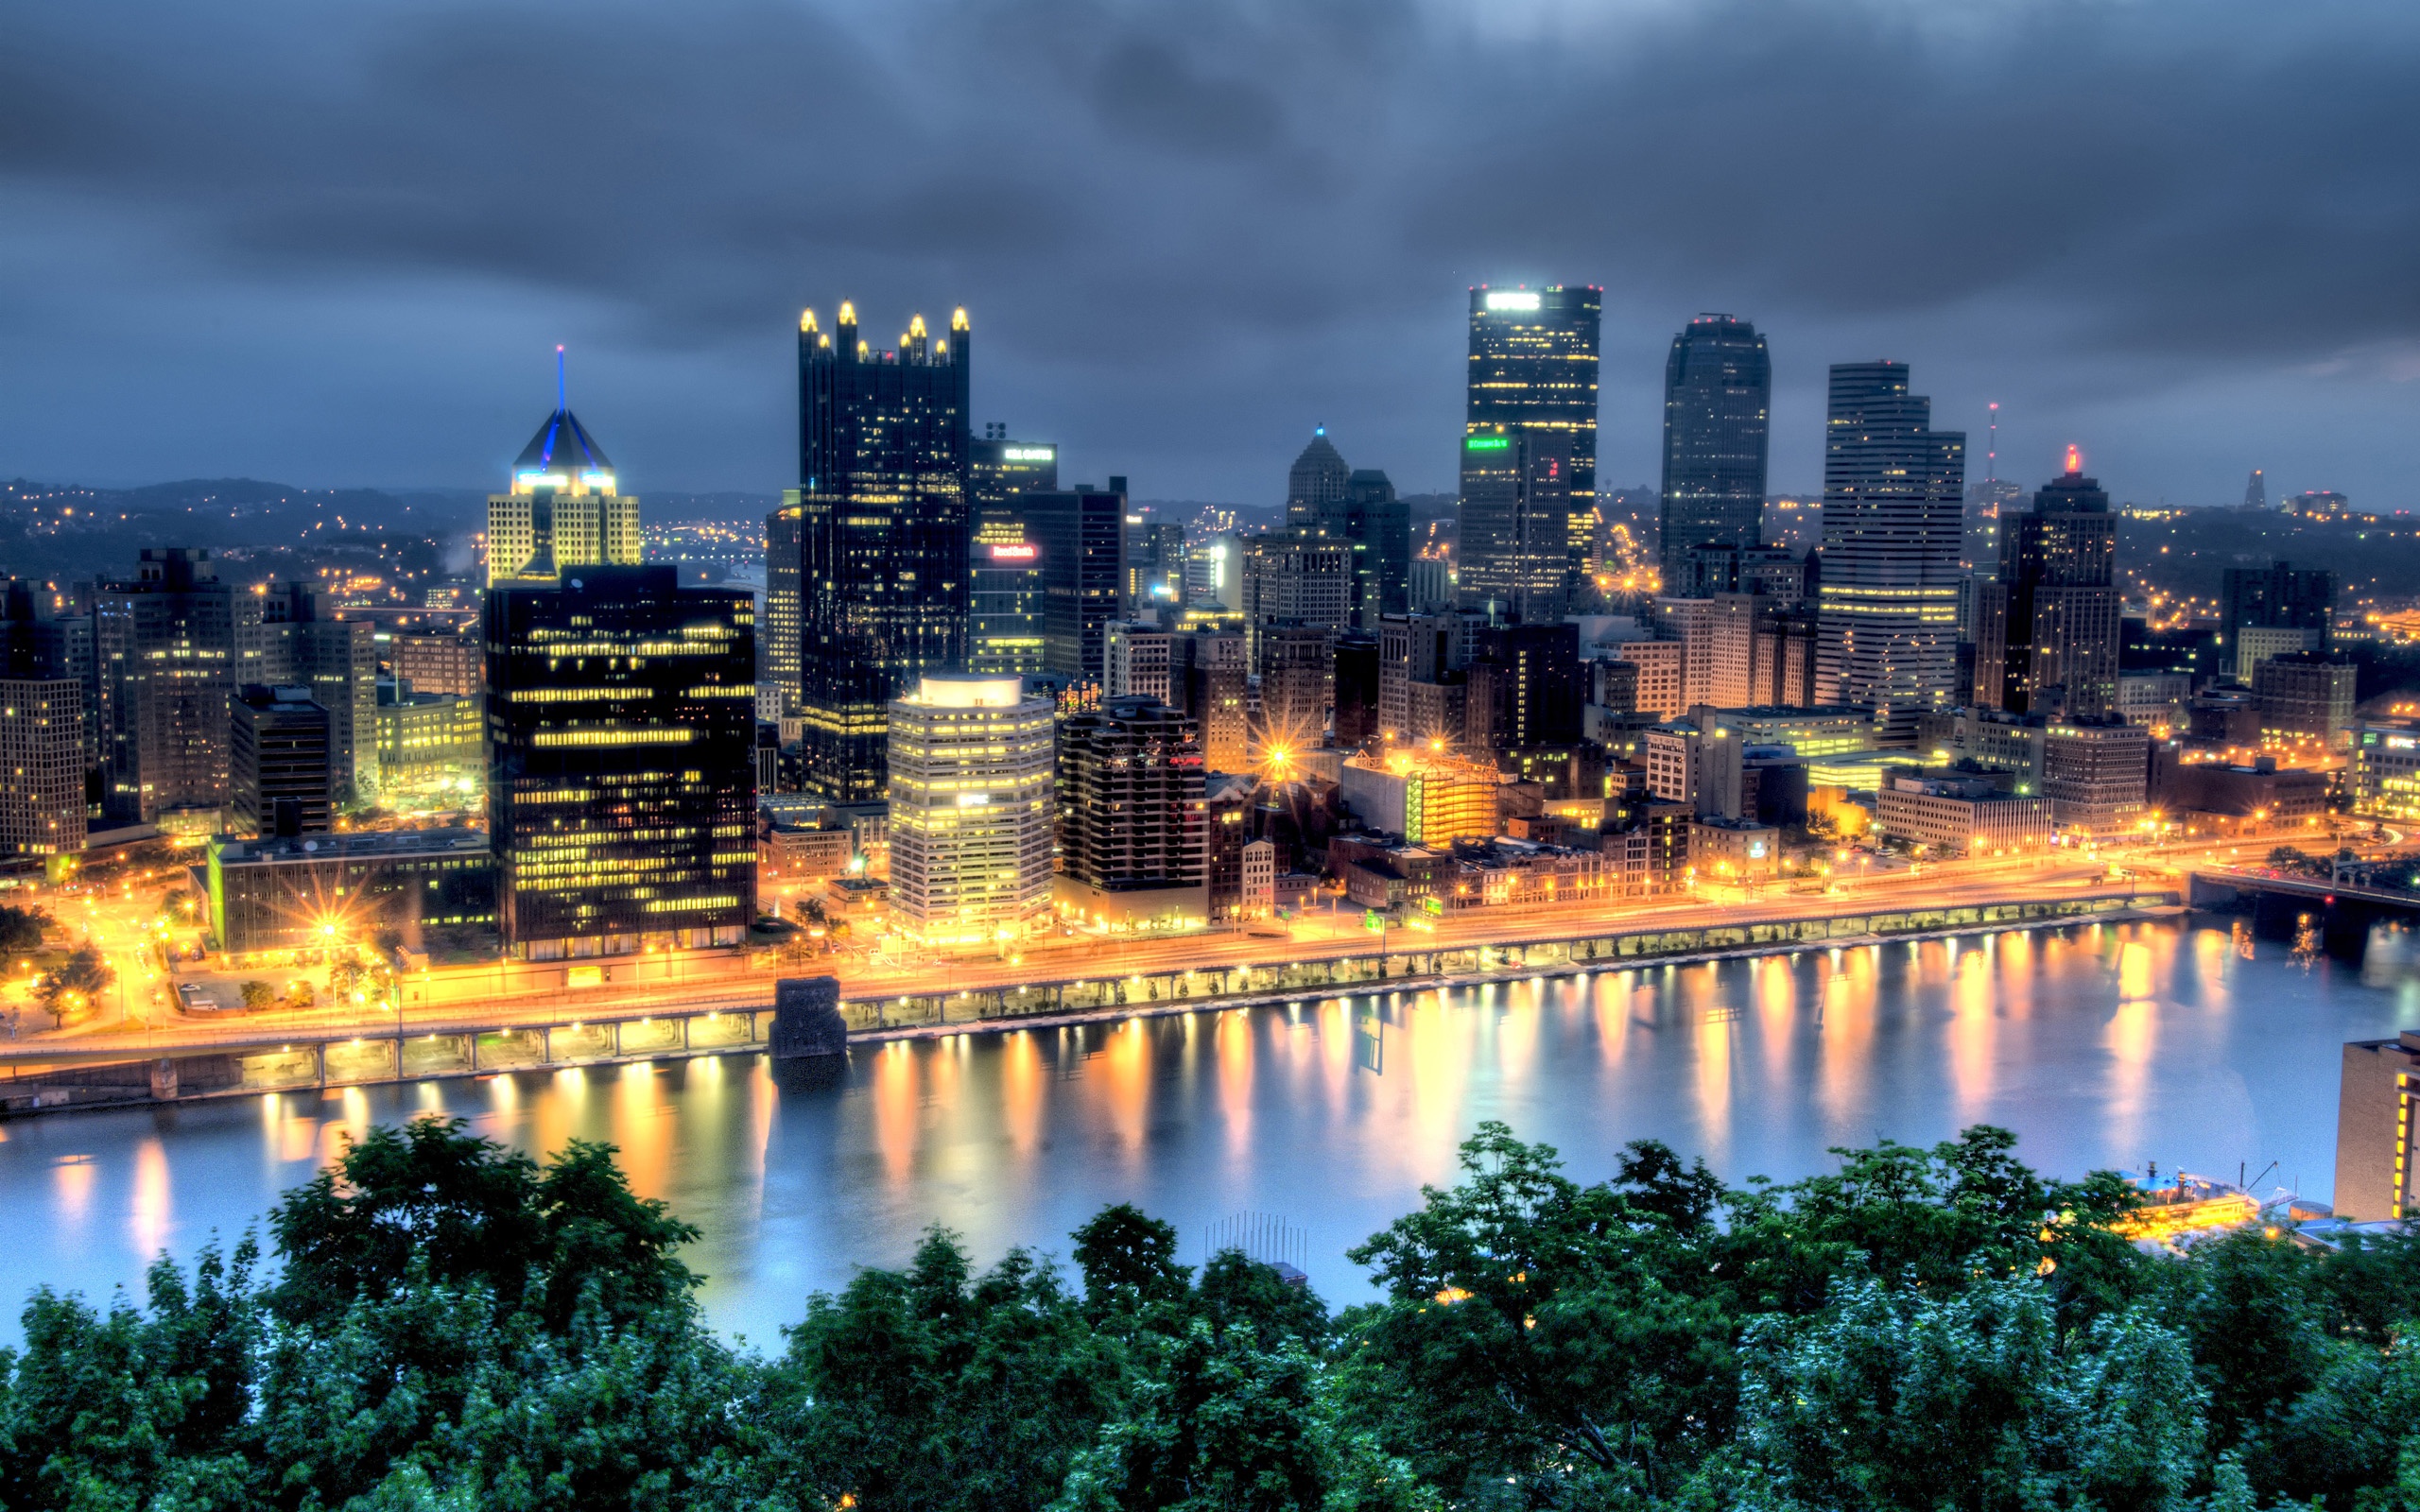 Pittsburgh in Dark Wallpapers   2560x1600   1592330 2560x1600